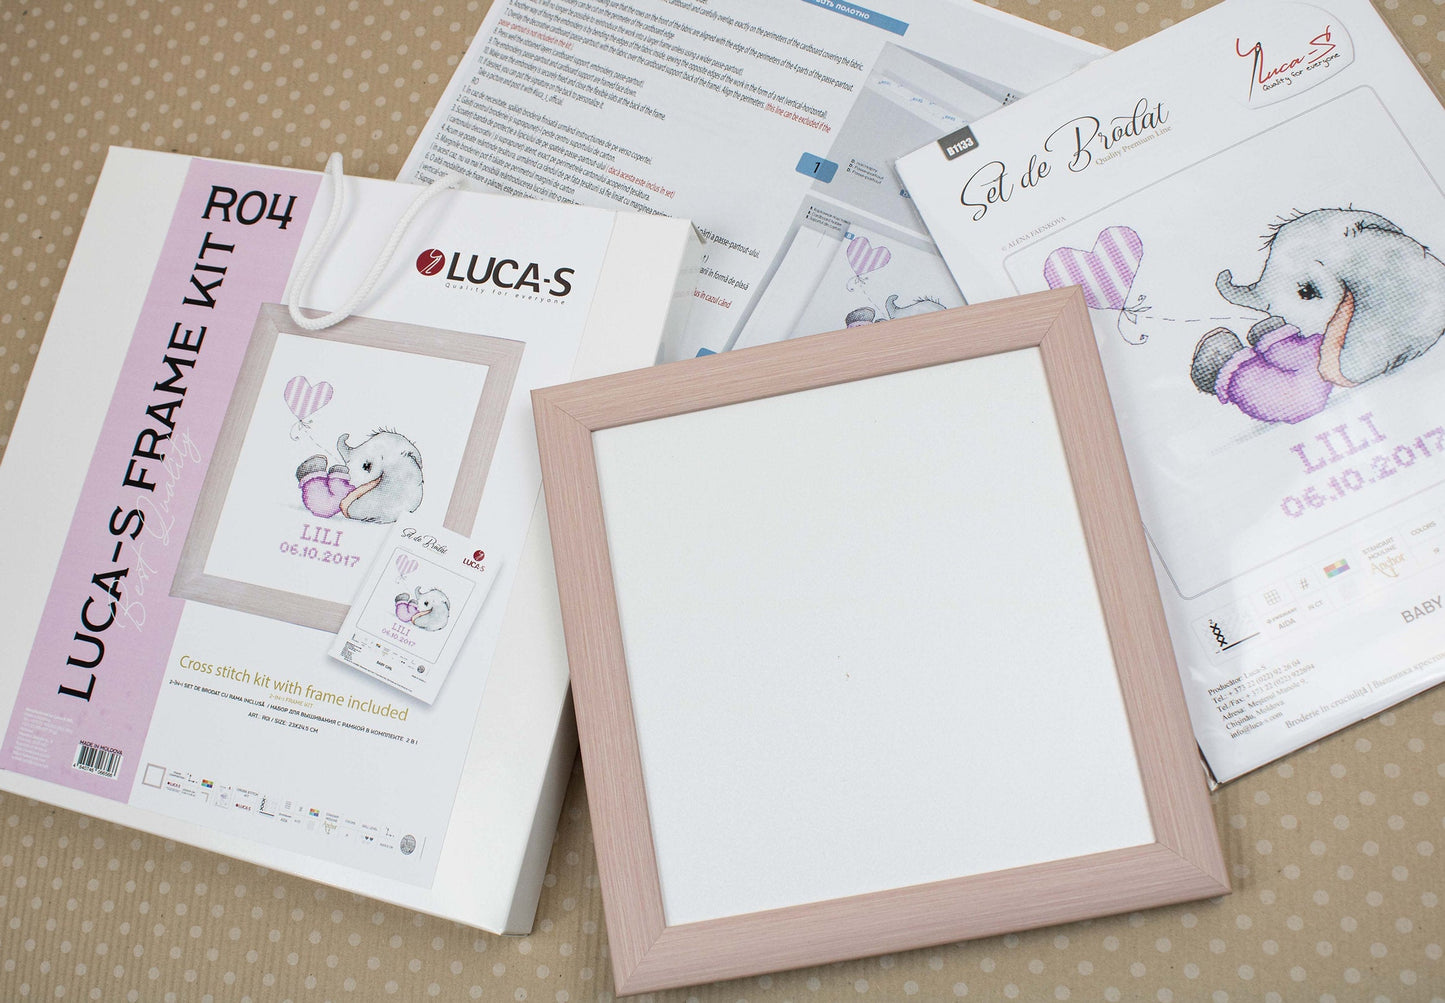 Cross Stitch Kit with Frame Included - Luca-S, R04